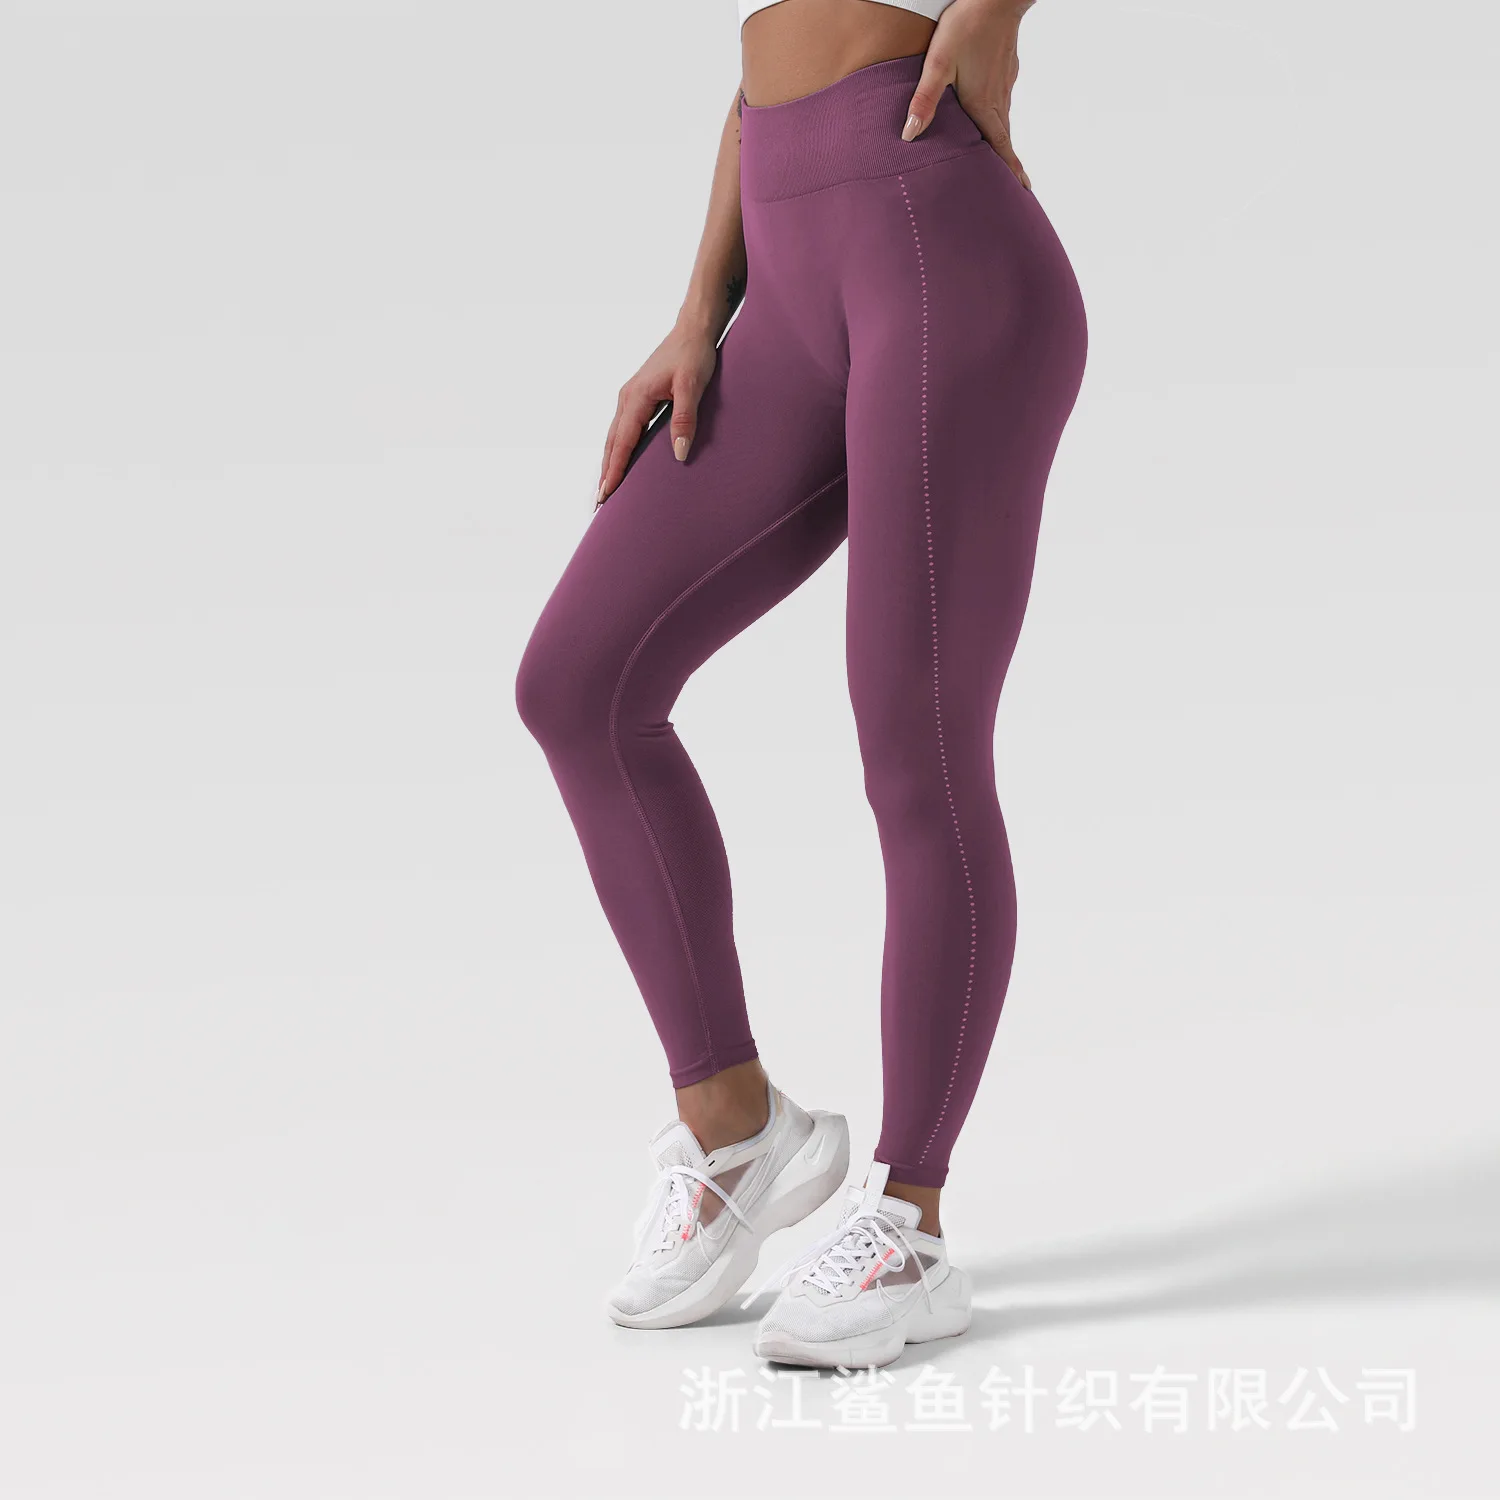 

NEW 80 Nylon 20 Spandex Women Workout Fitness Gym Wear Clothes Yoga Pants Leggings for High V Waisted Nude Feel with Pockets Age, Custom color